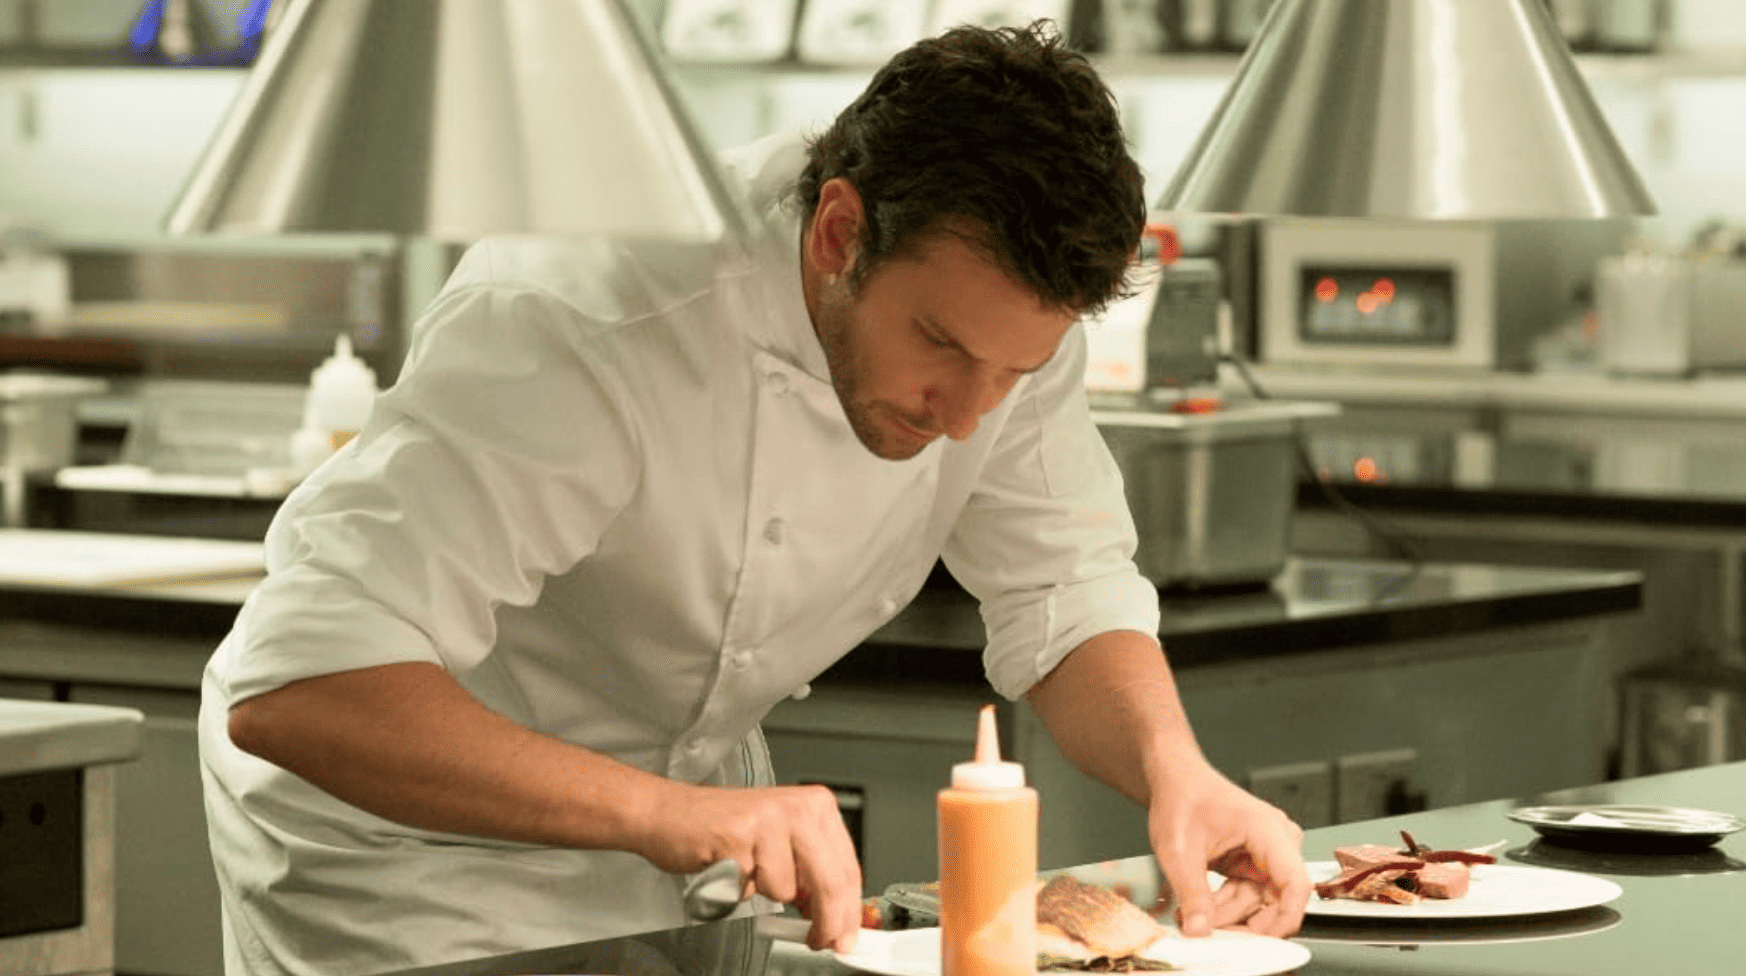 Bradley Cooper dressed in a chef uniform standing in an industrial kitchen putting the finishing touches on a dish in this image from 3 Arts Entertainment.